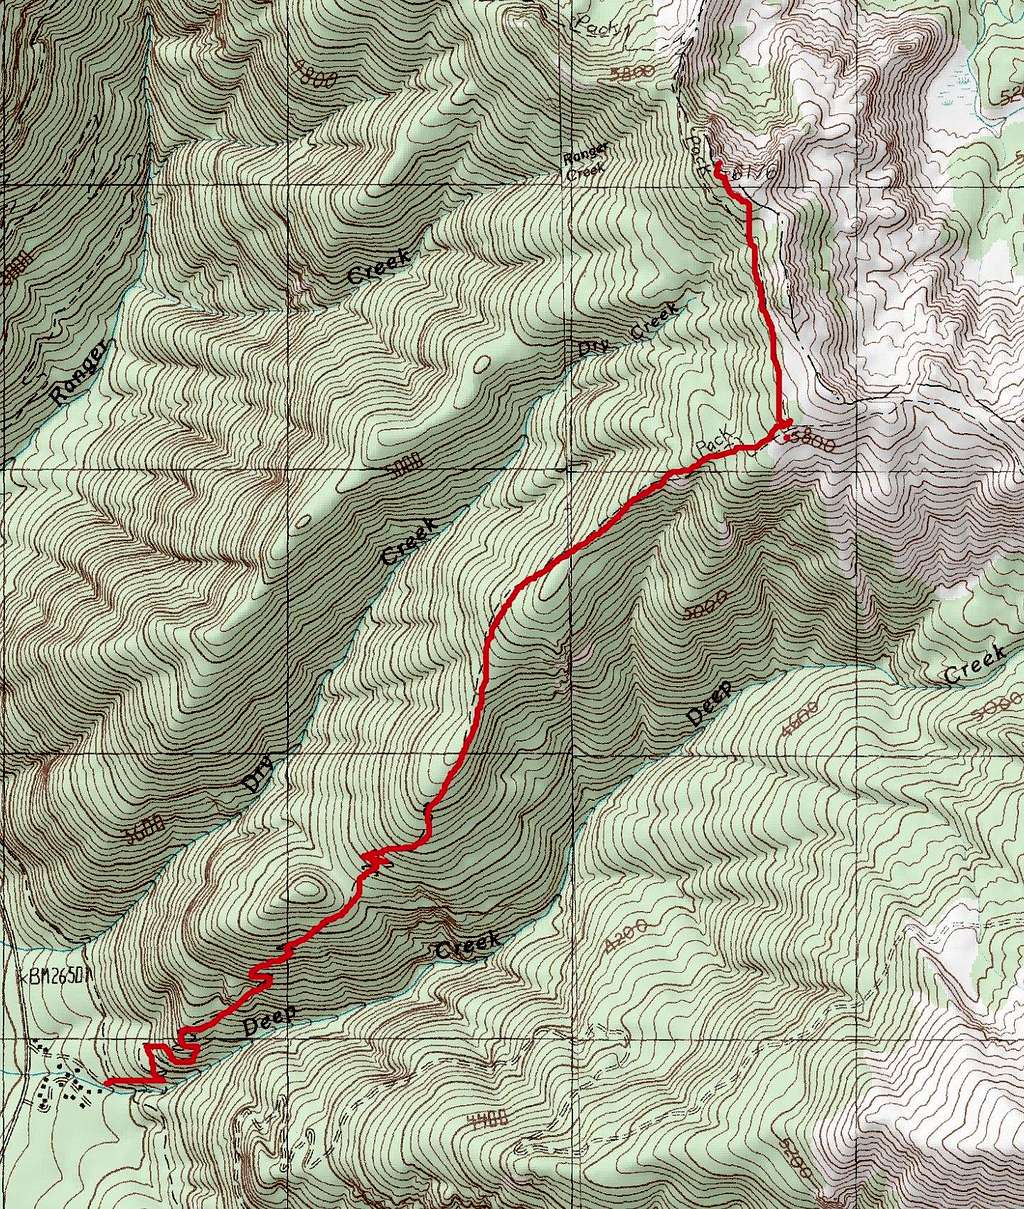 Ignoble Knob Summer Route (May not be open until fire debris cleared)